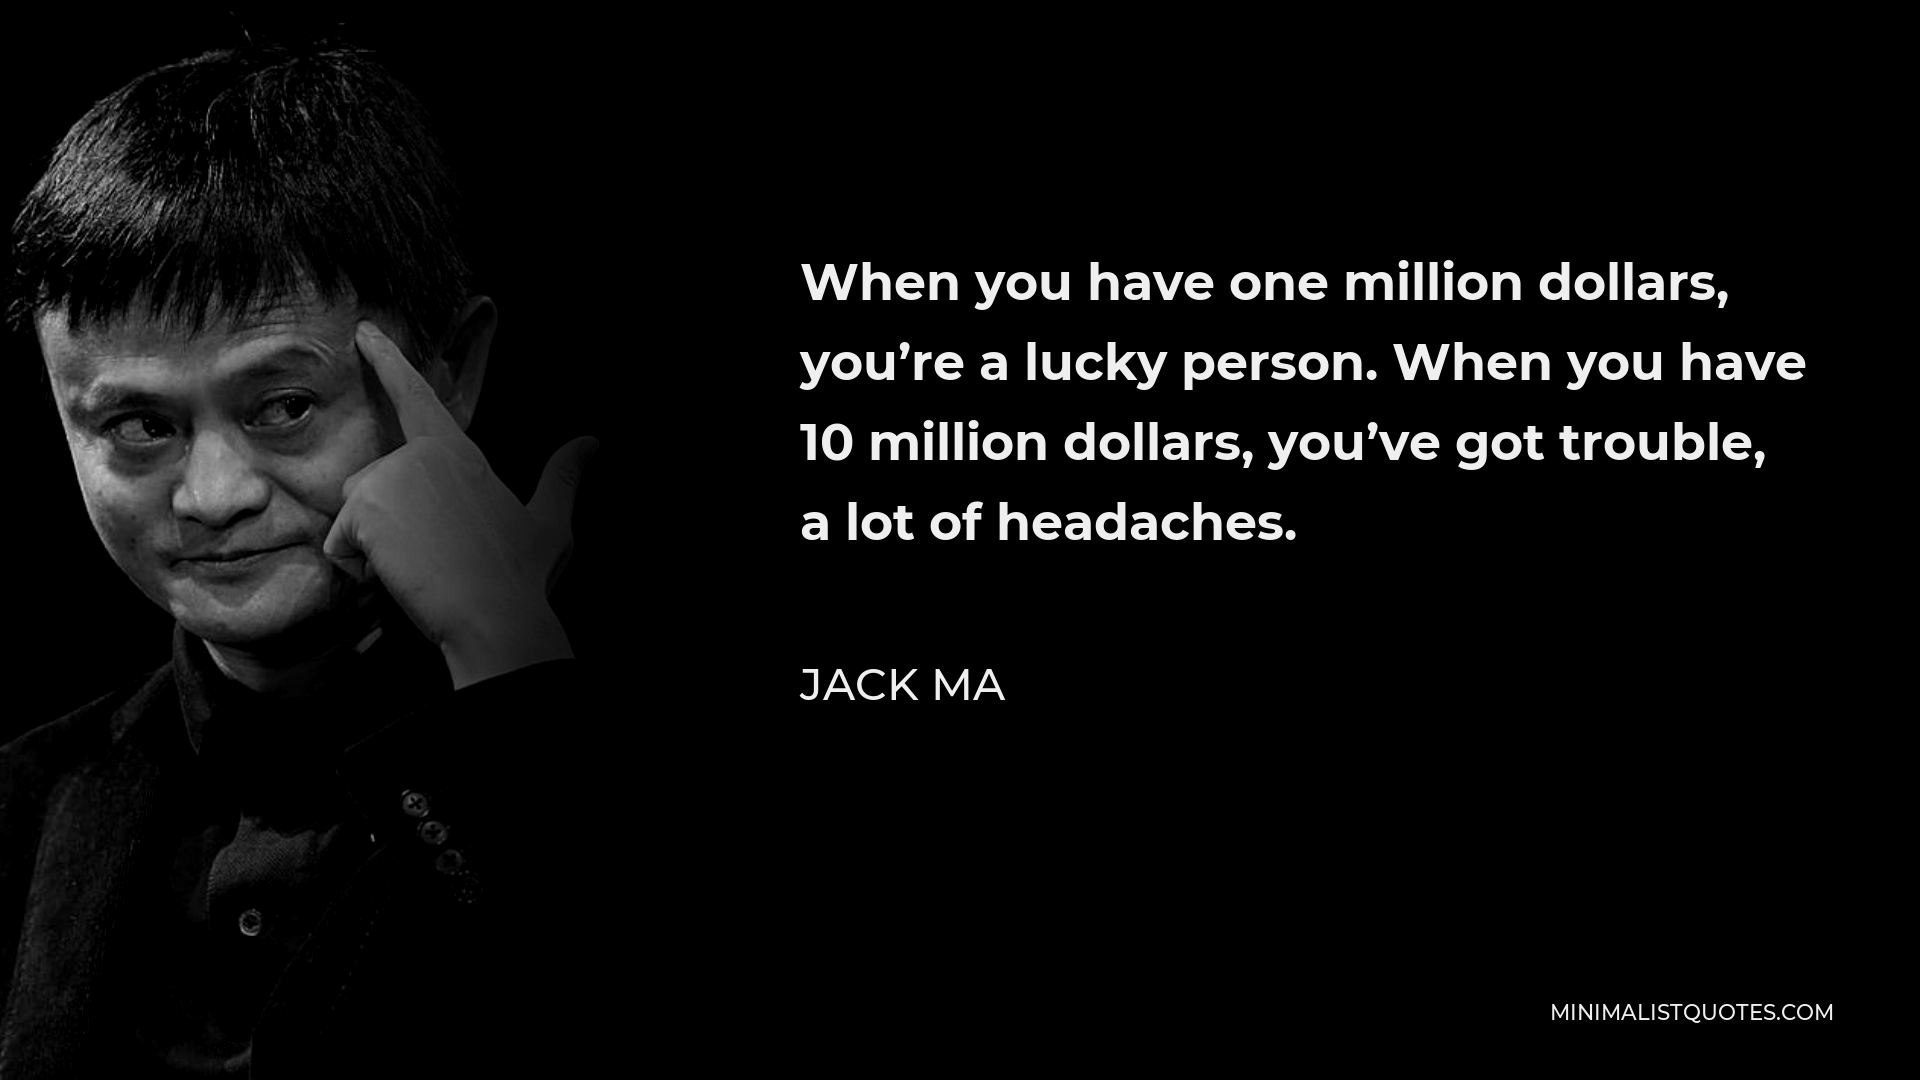 Jack Ma Quote - When you have one million dollars, you’re a lucky person. When you have 10 million dollars, you’ve got trouble, a lot of headaches.